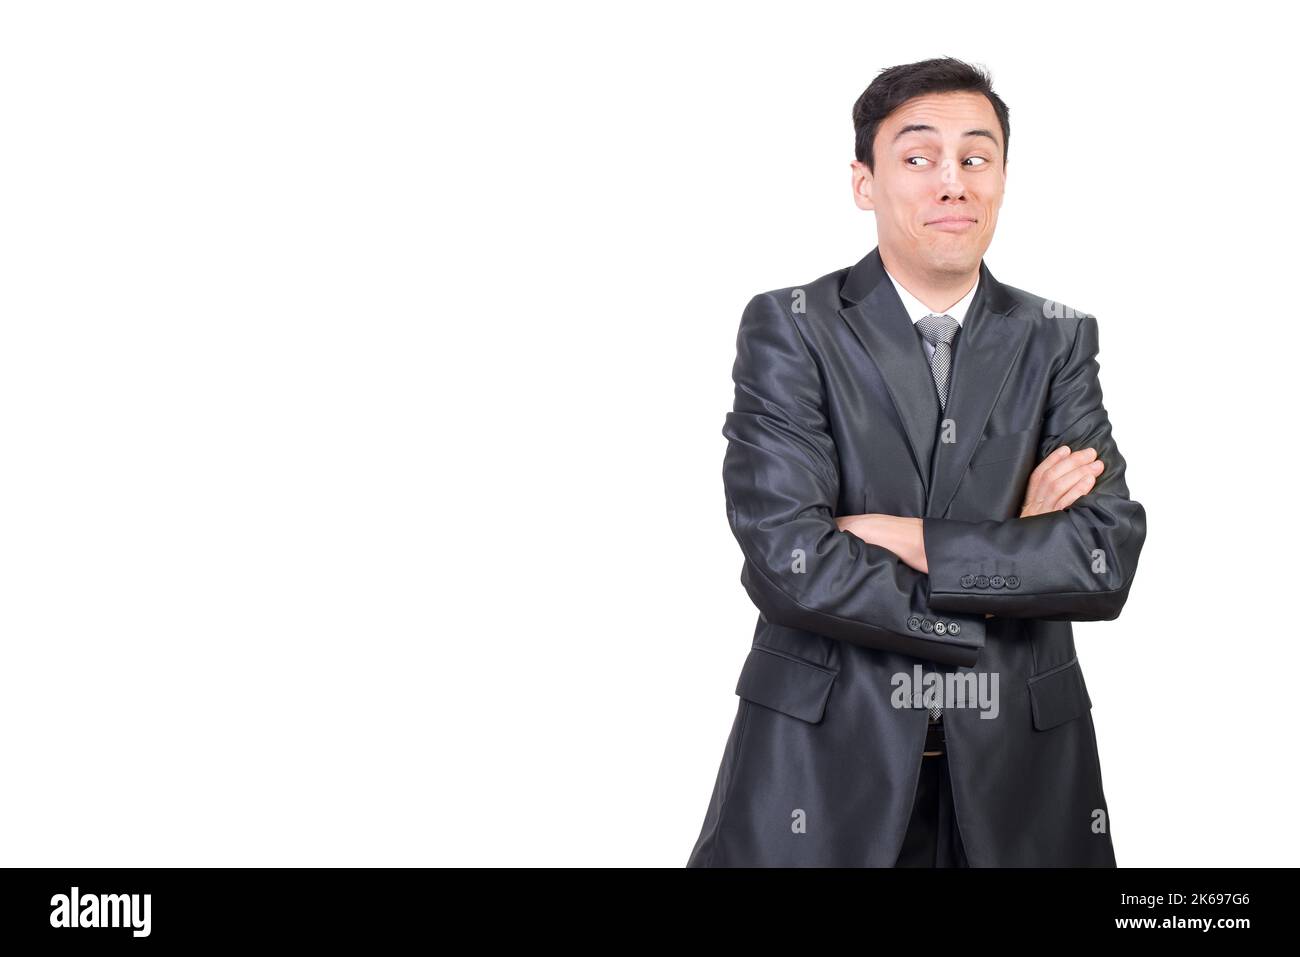 Surprised man in suit with crossed arms Stock Photo